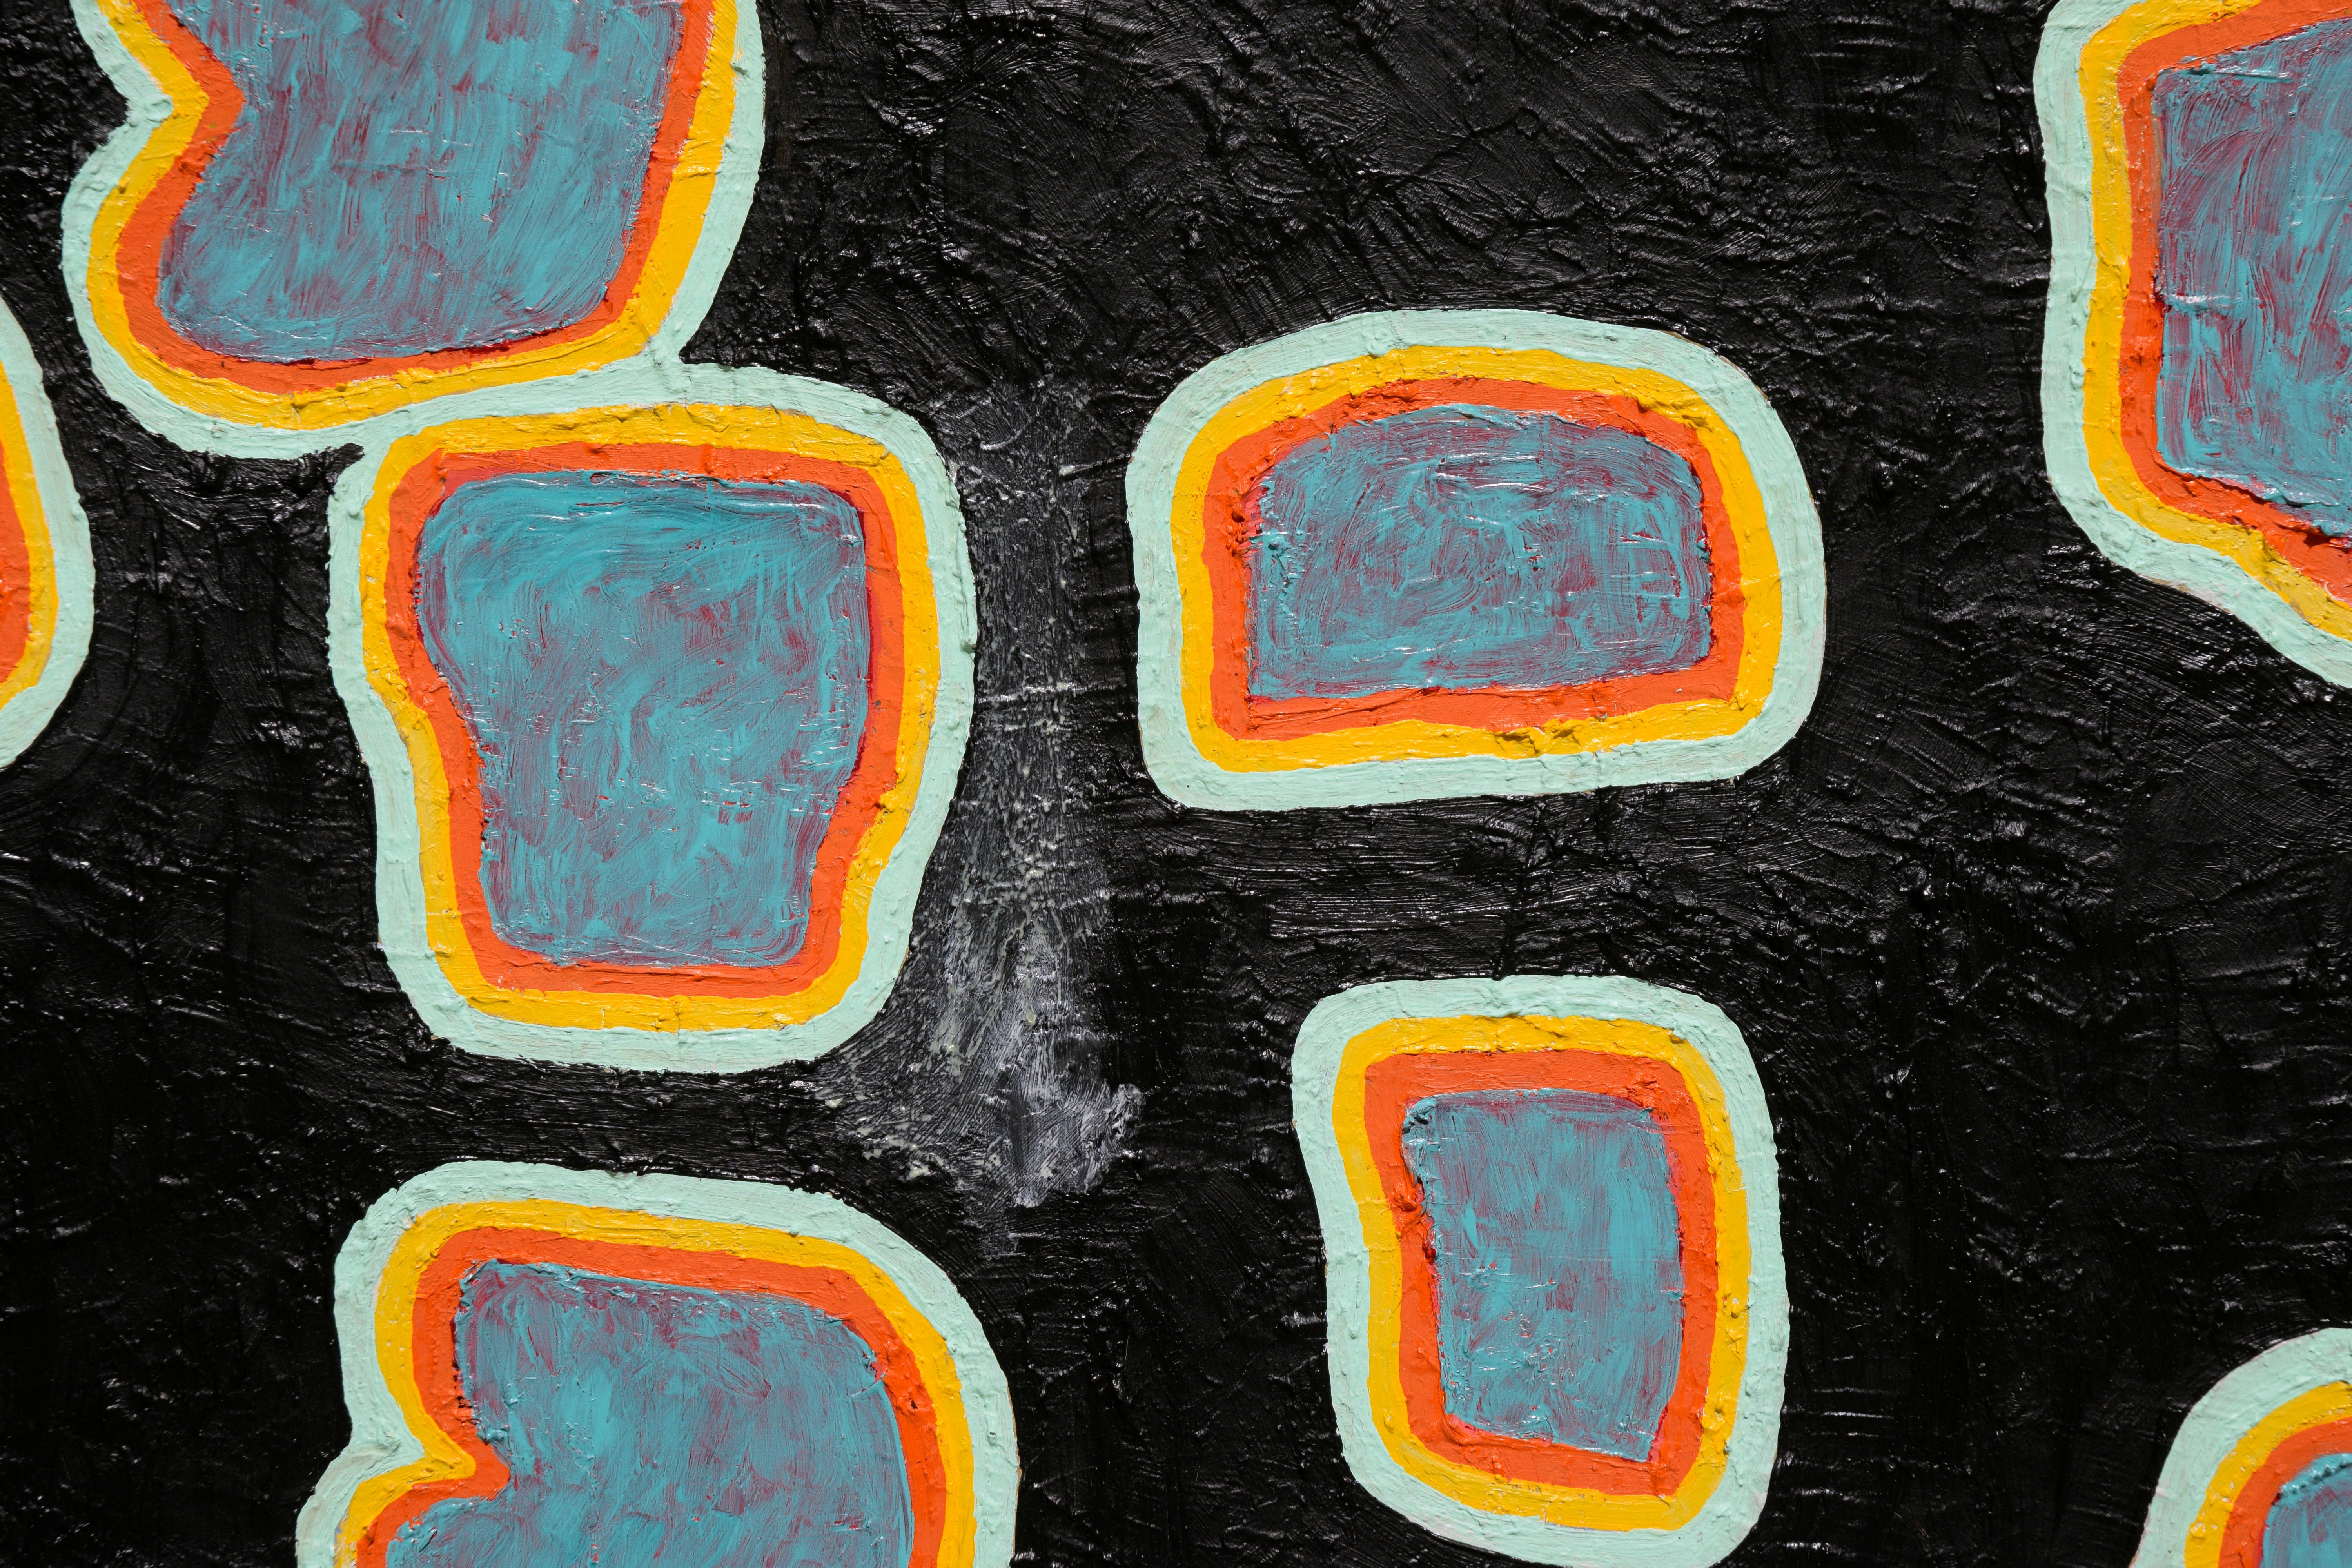 Blue and Orange Shapes on a Black Field - Abstract Geometric Painting by Michael Pauker 